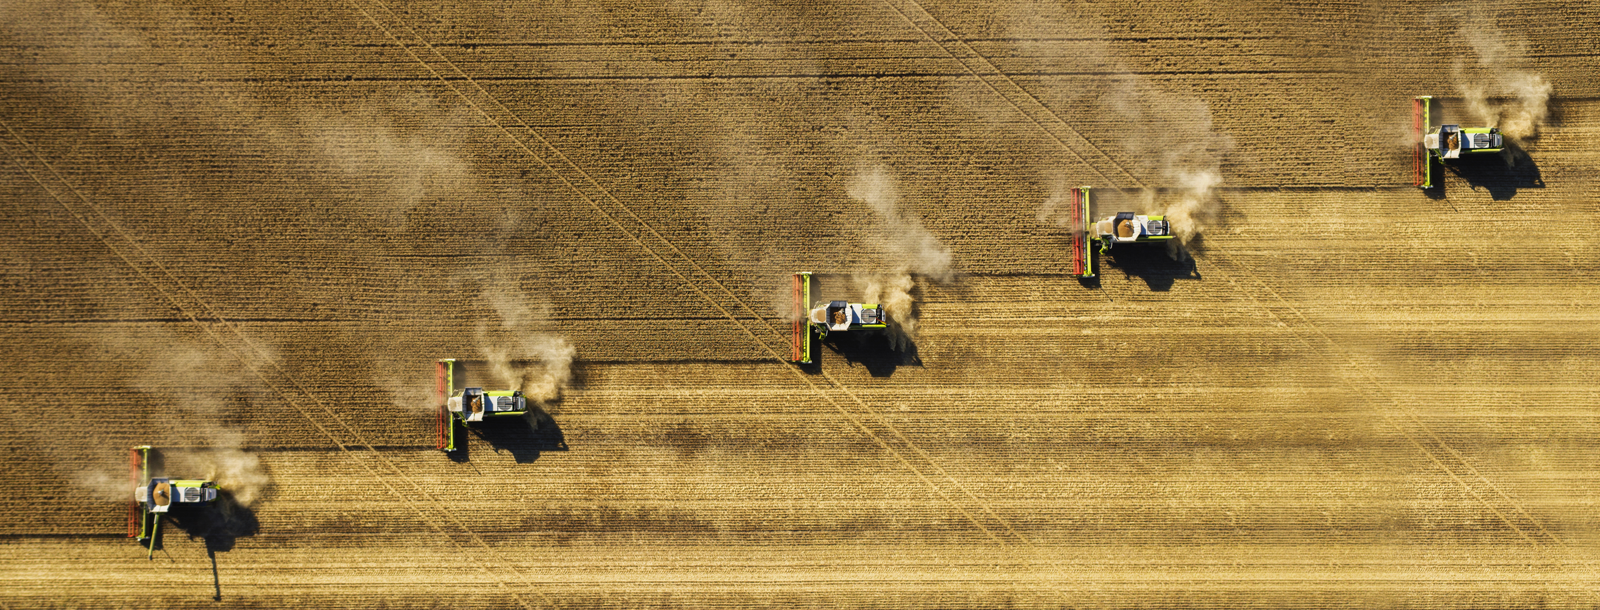 A row of tractors harvesting a wheat field